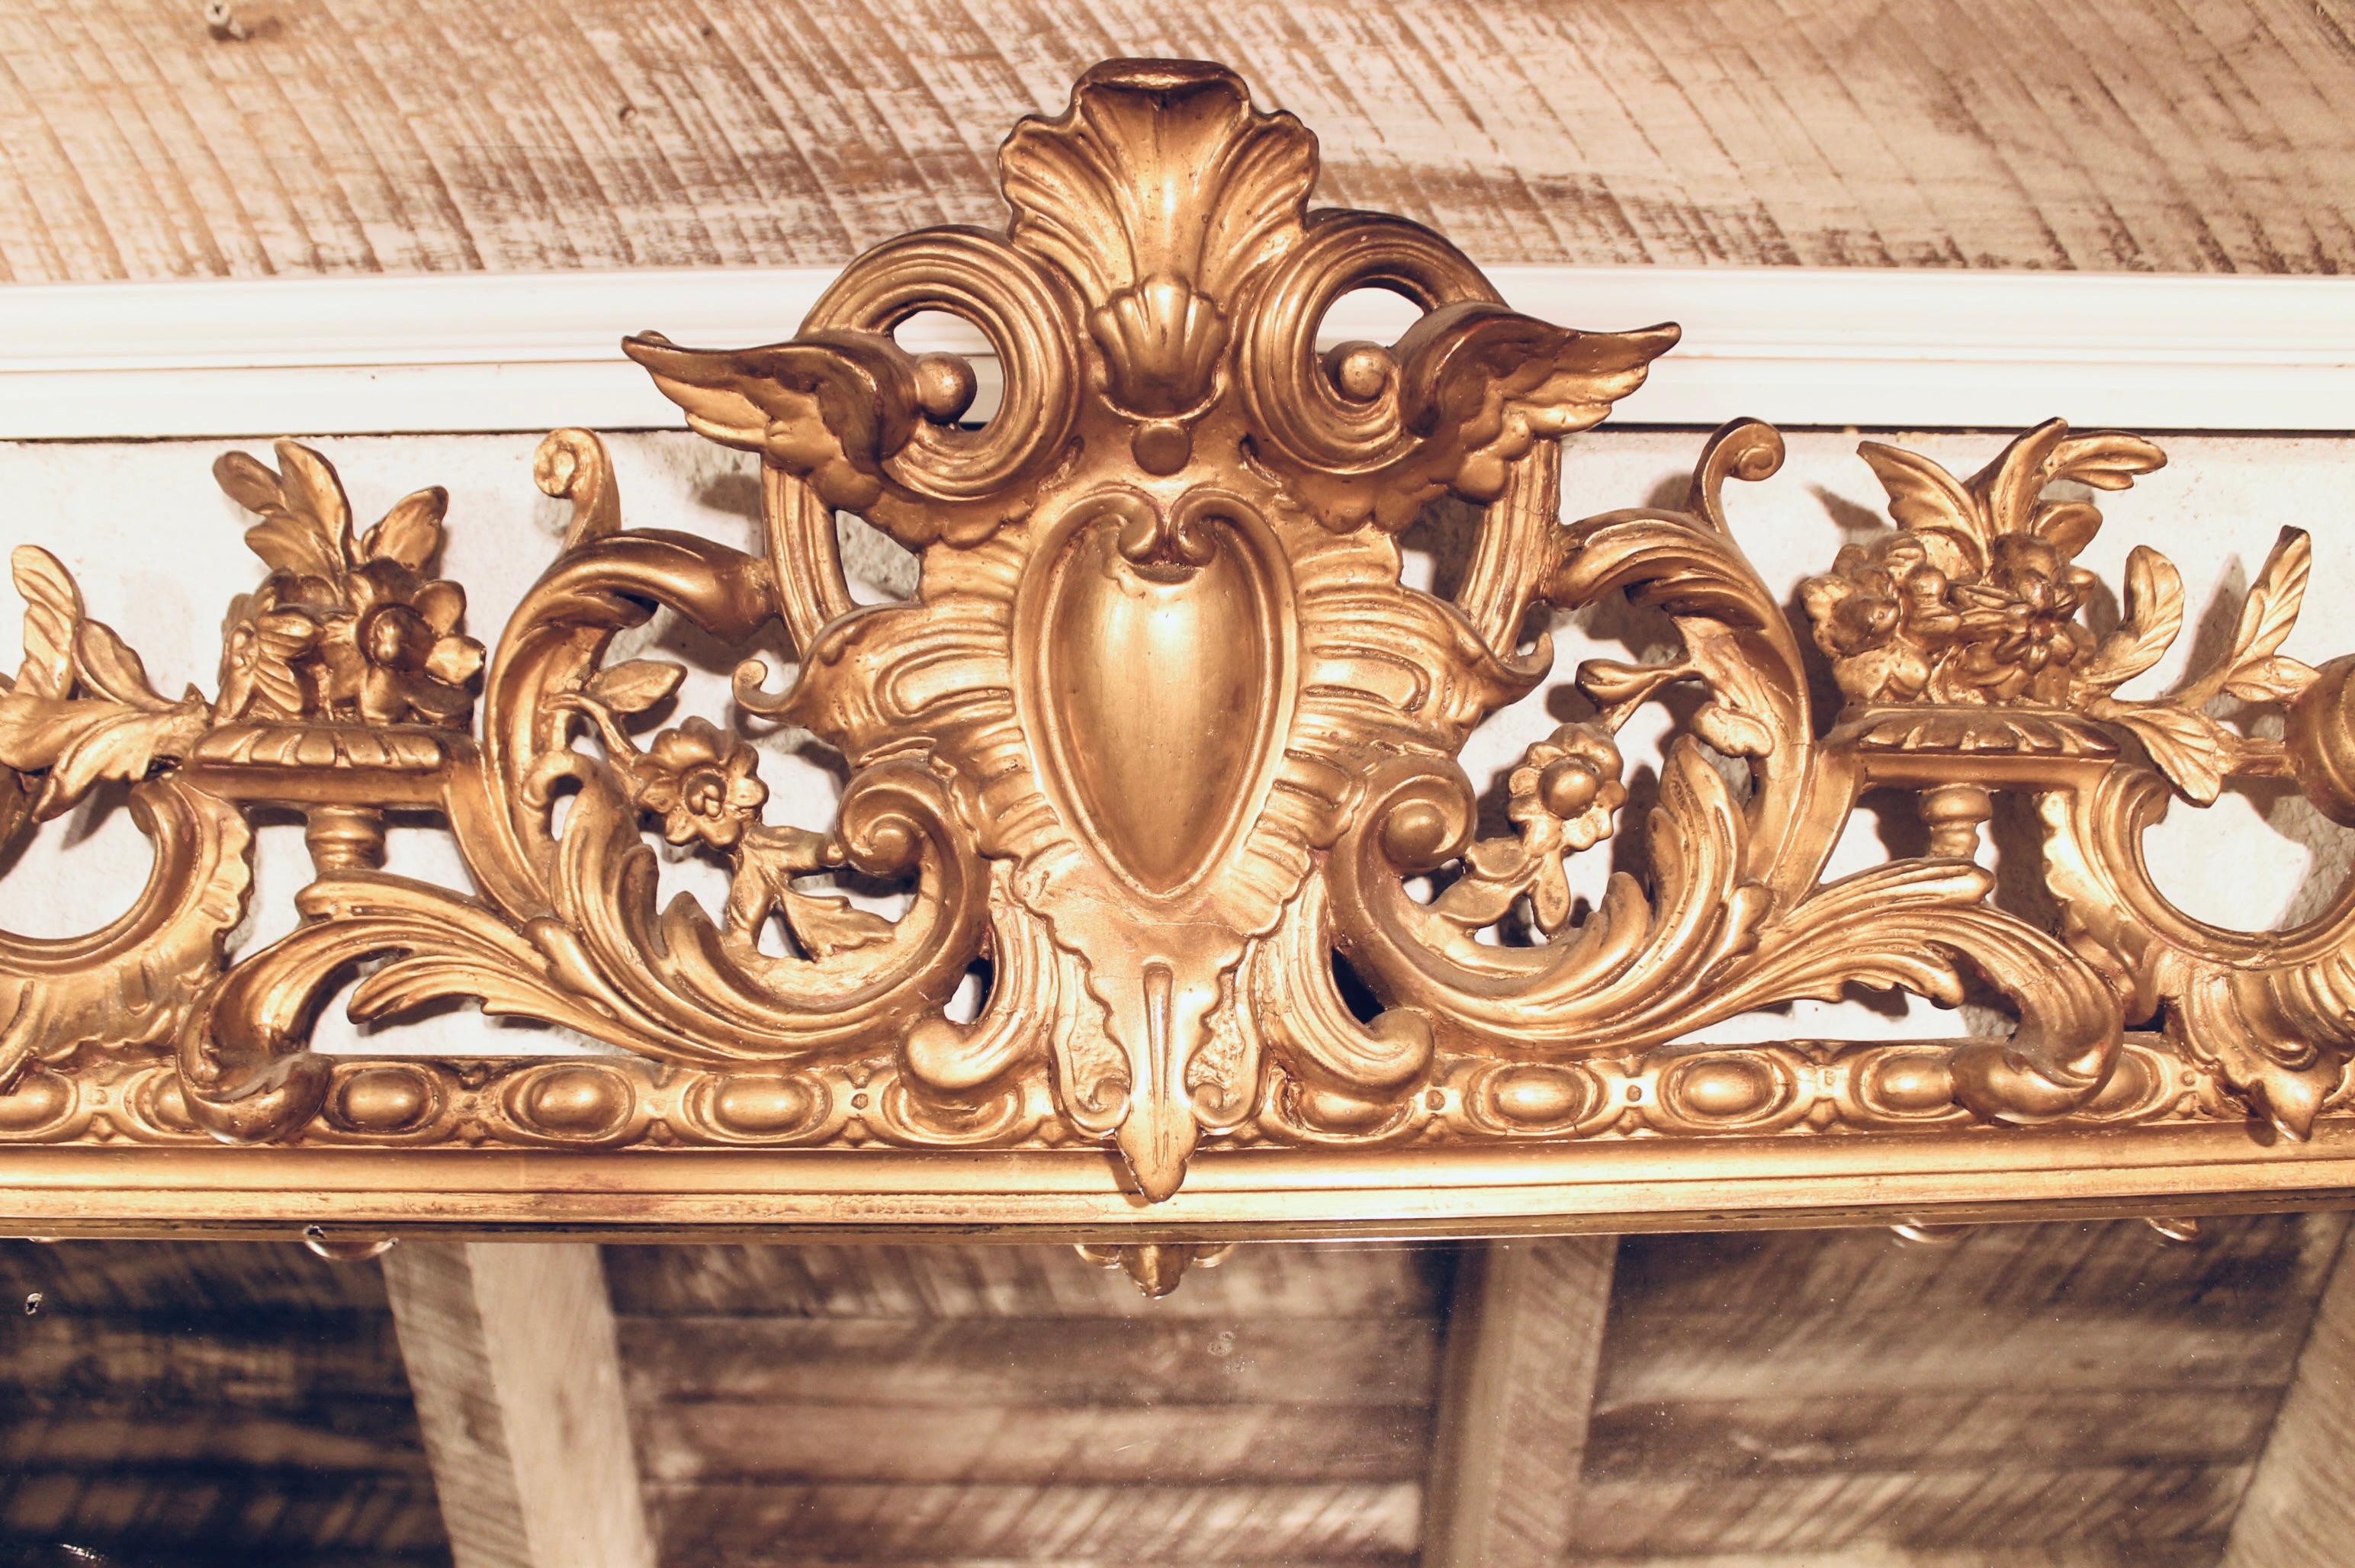 A large and impressive gilded pier mirror, the crest with a winged cartouche set among exuberant Rococo scrolling forms at the center. Pearl borders, a variation on egg and dart moldings and elongated cartouche corners complete the surround. The